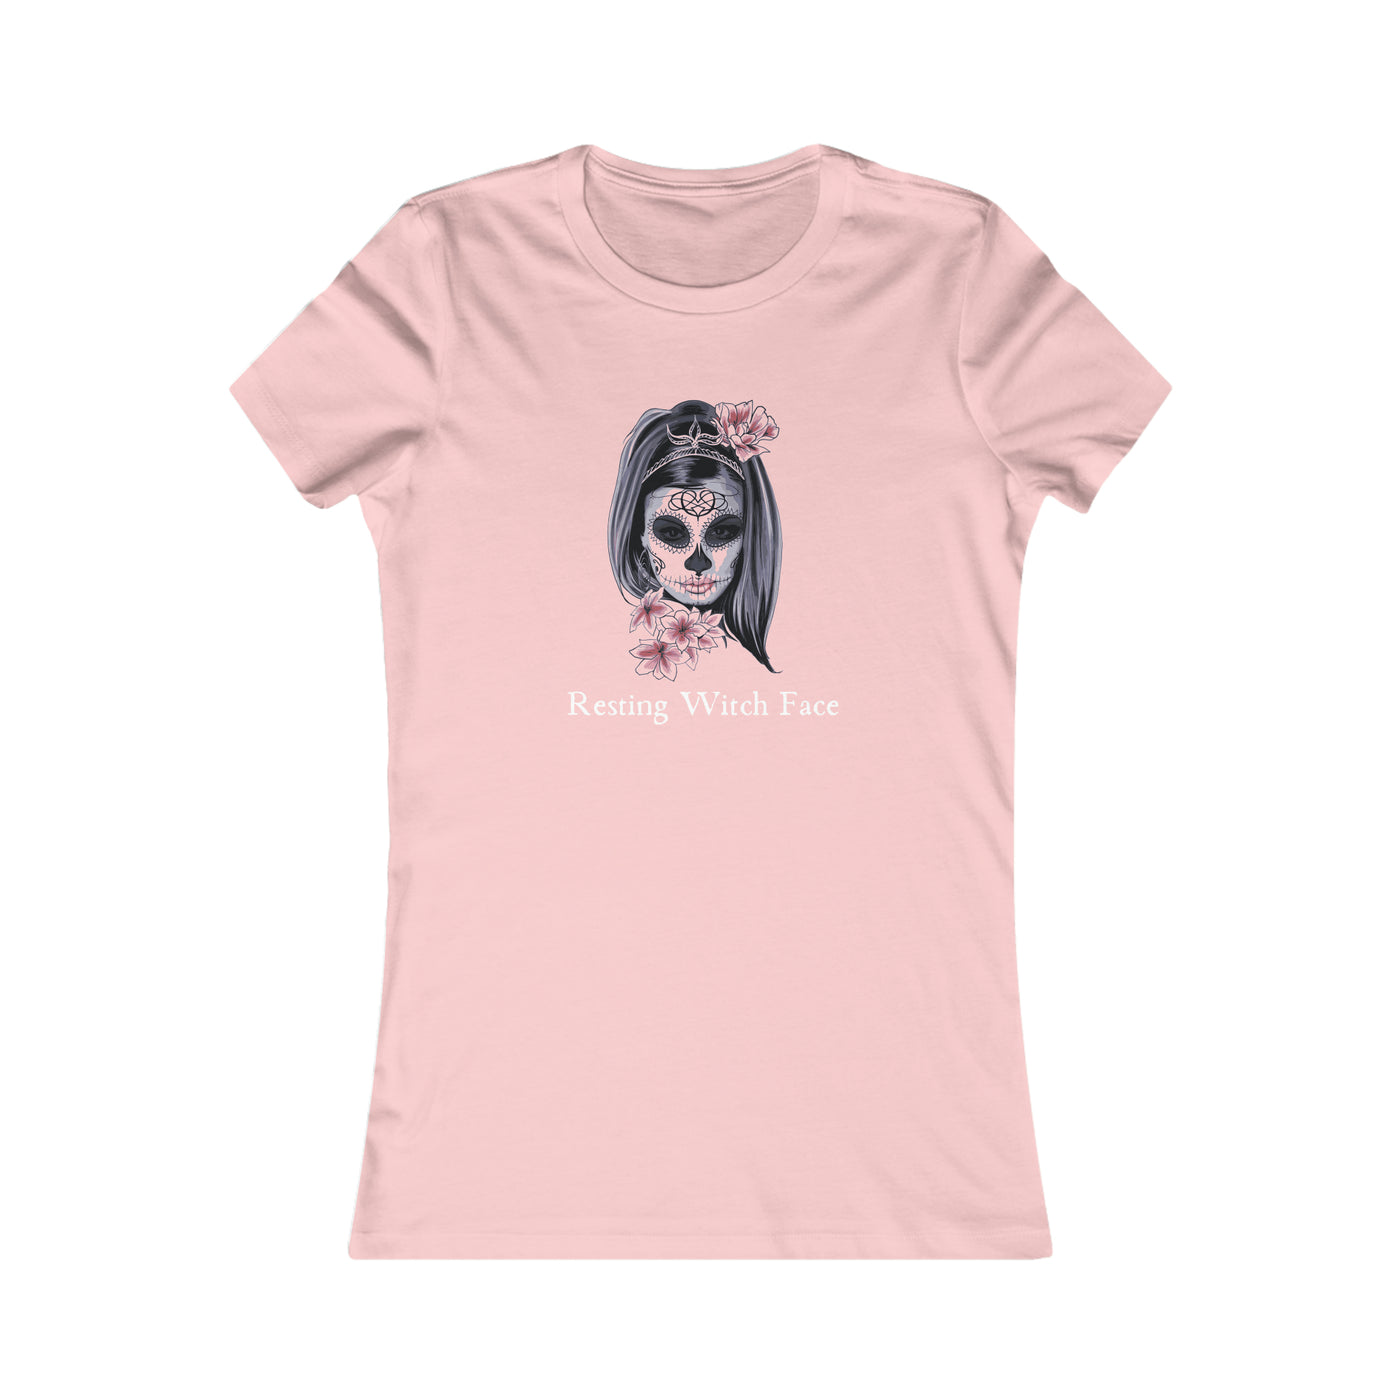 Resting Witch Face Women's Favorite Tee